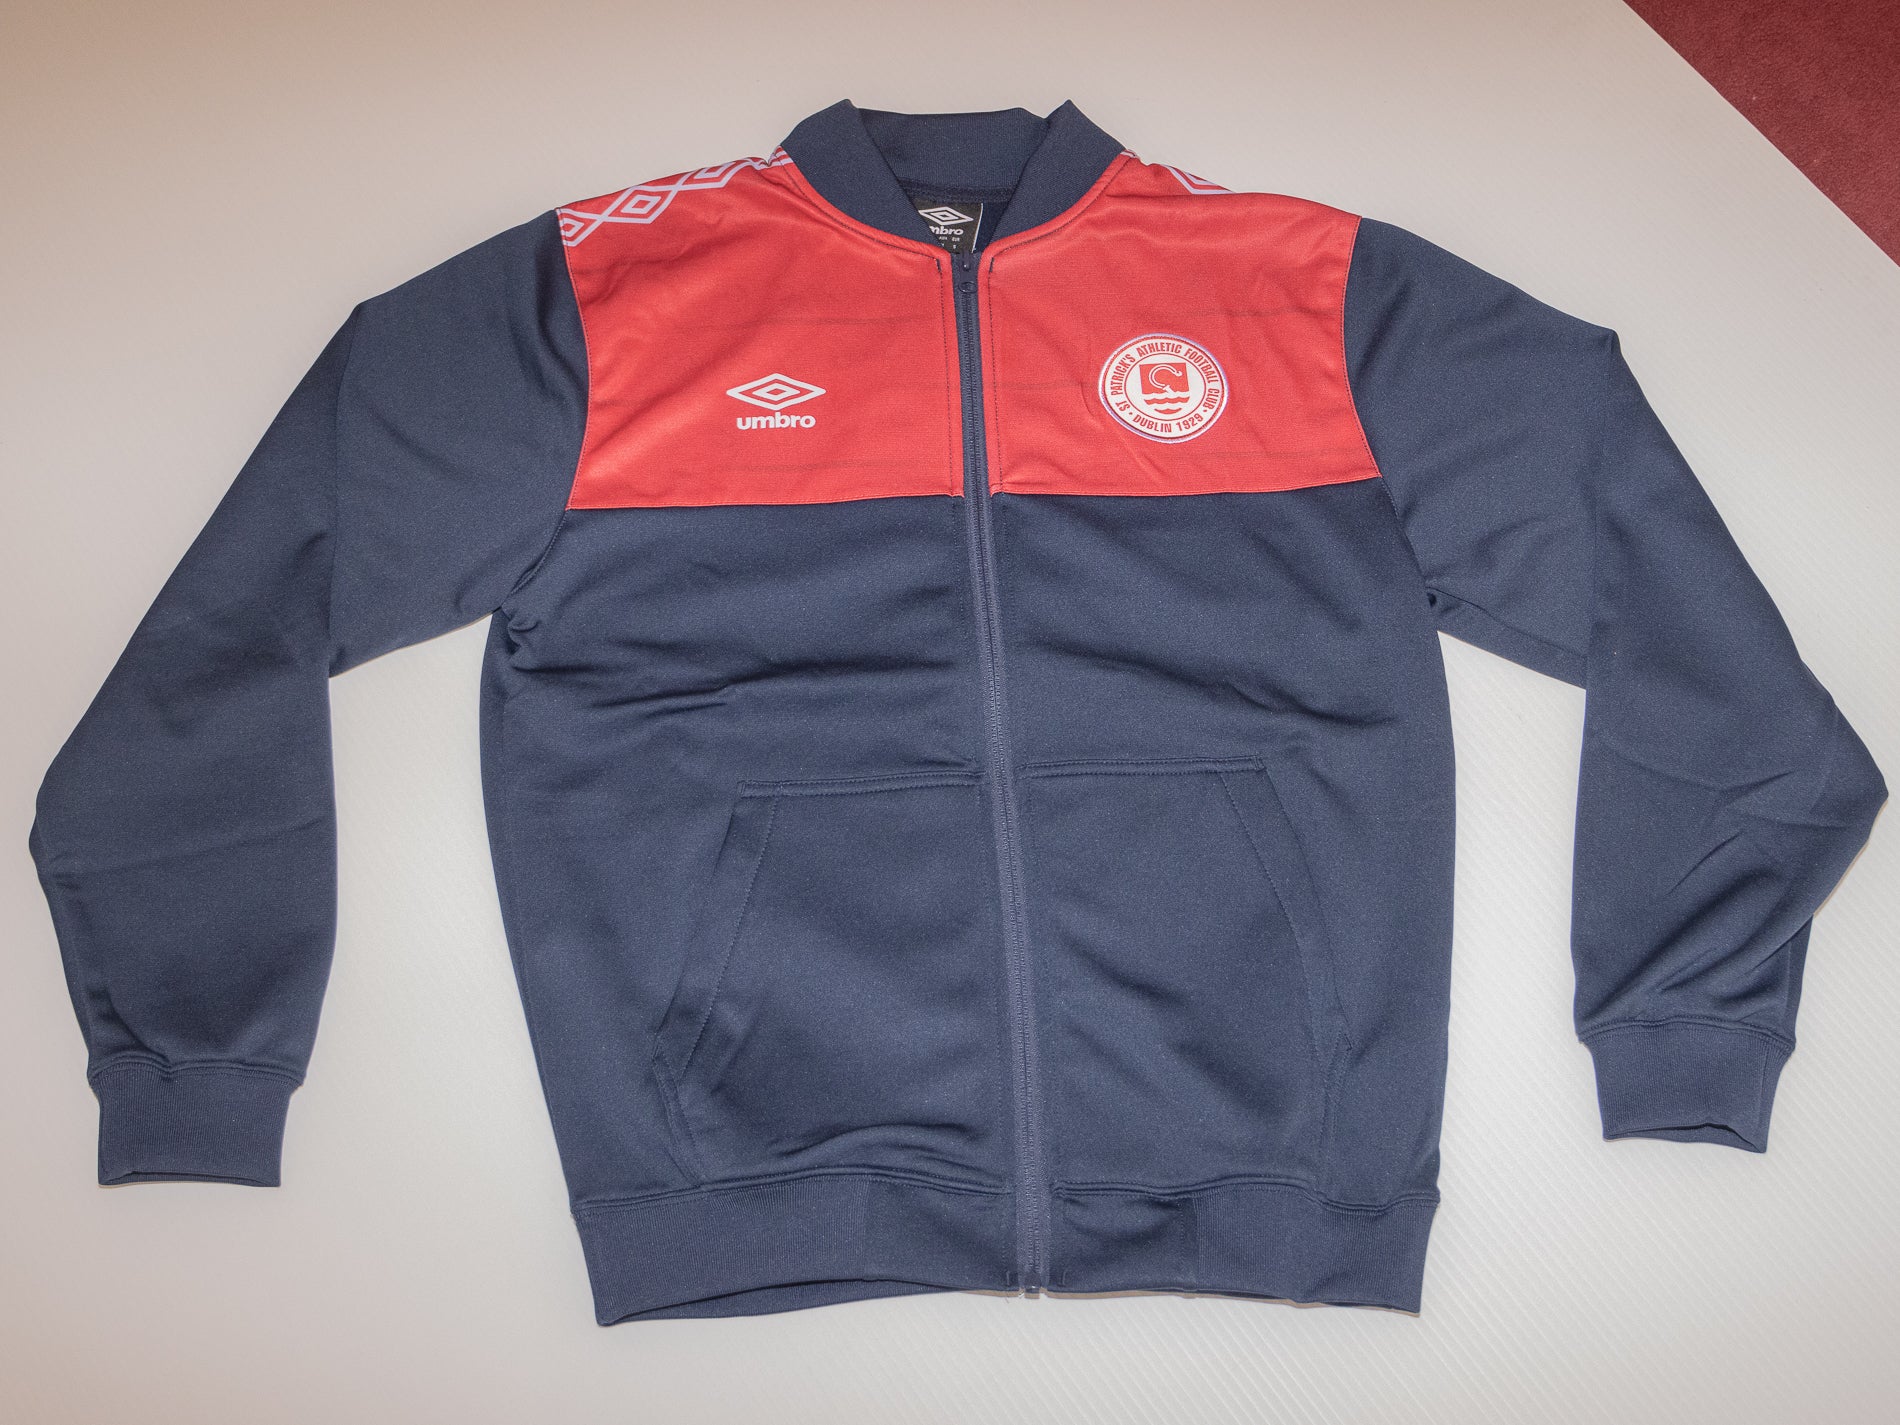 2023 Home Walkout Jacket - Navy/Red - Adult - (2329)